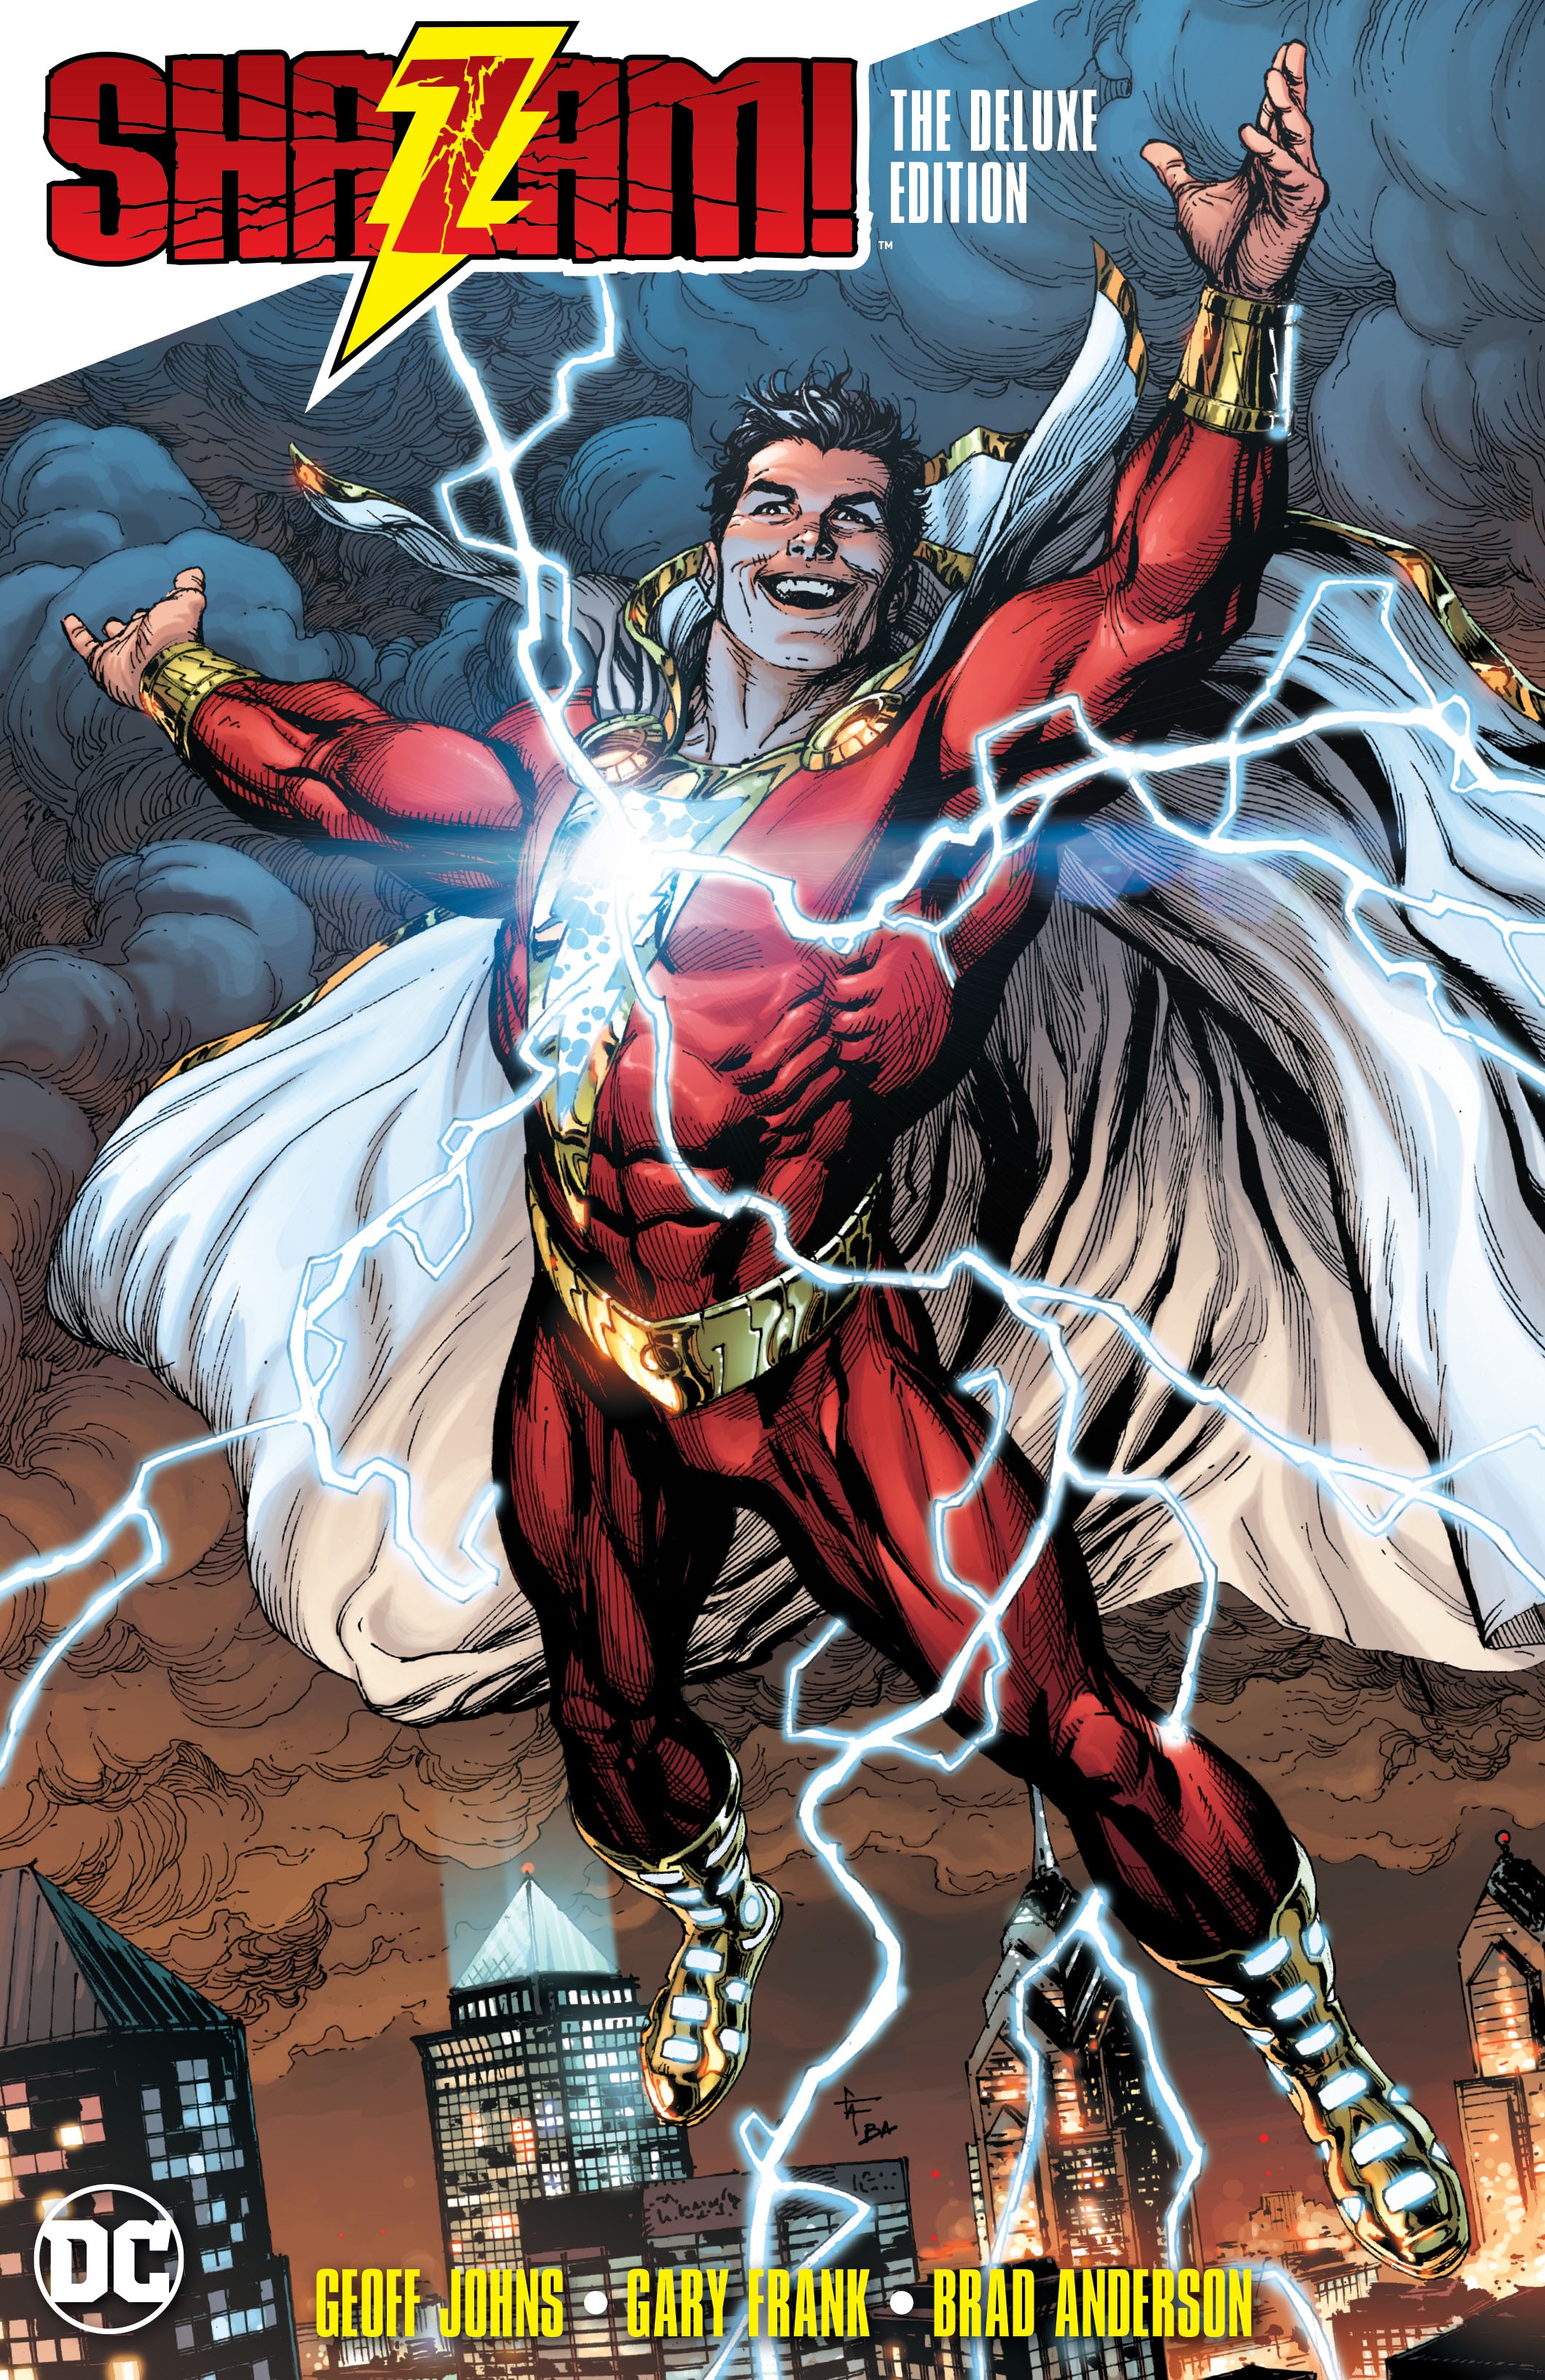 Read online Shazam! The Deluxe Edition comic -  Issue # TPB (Part 1) - 1